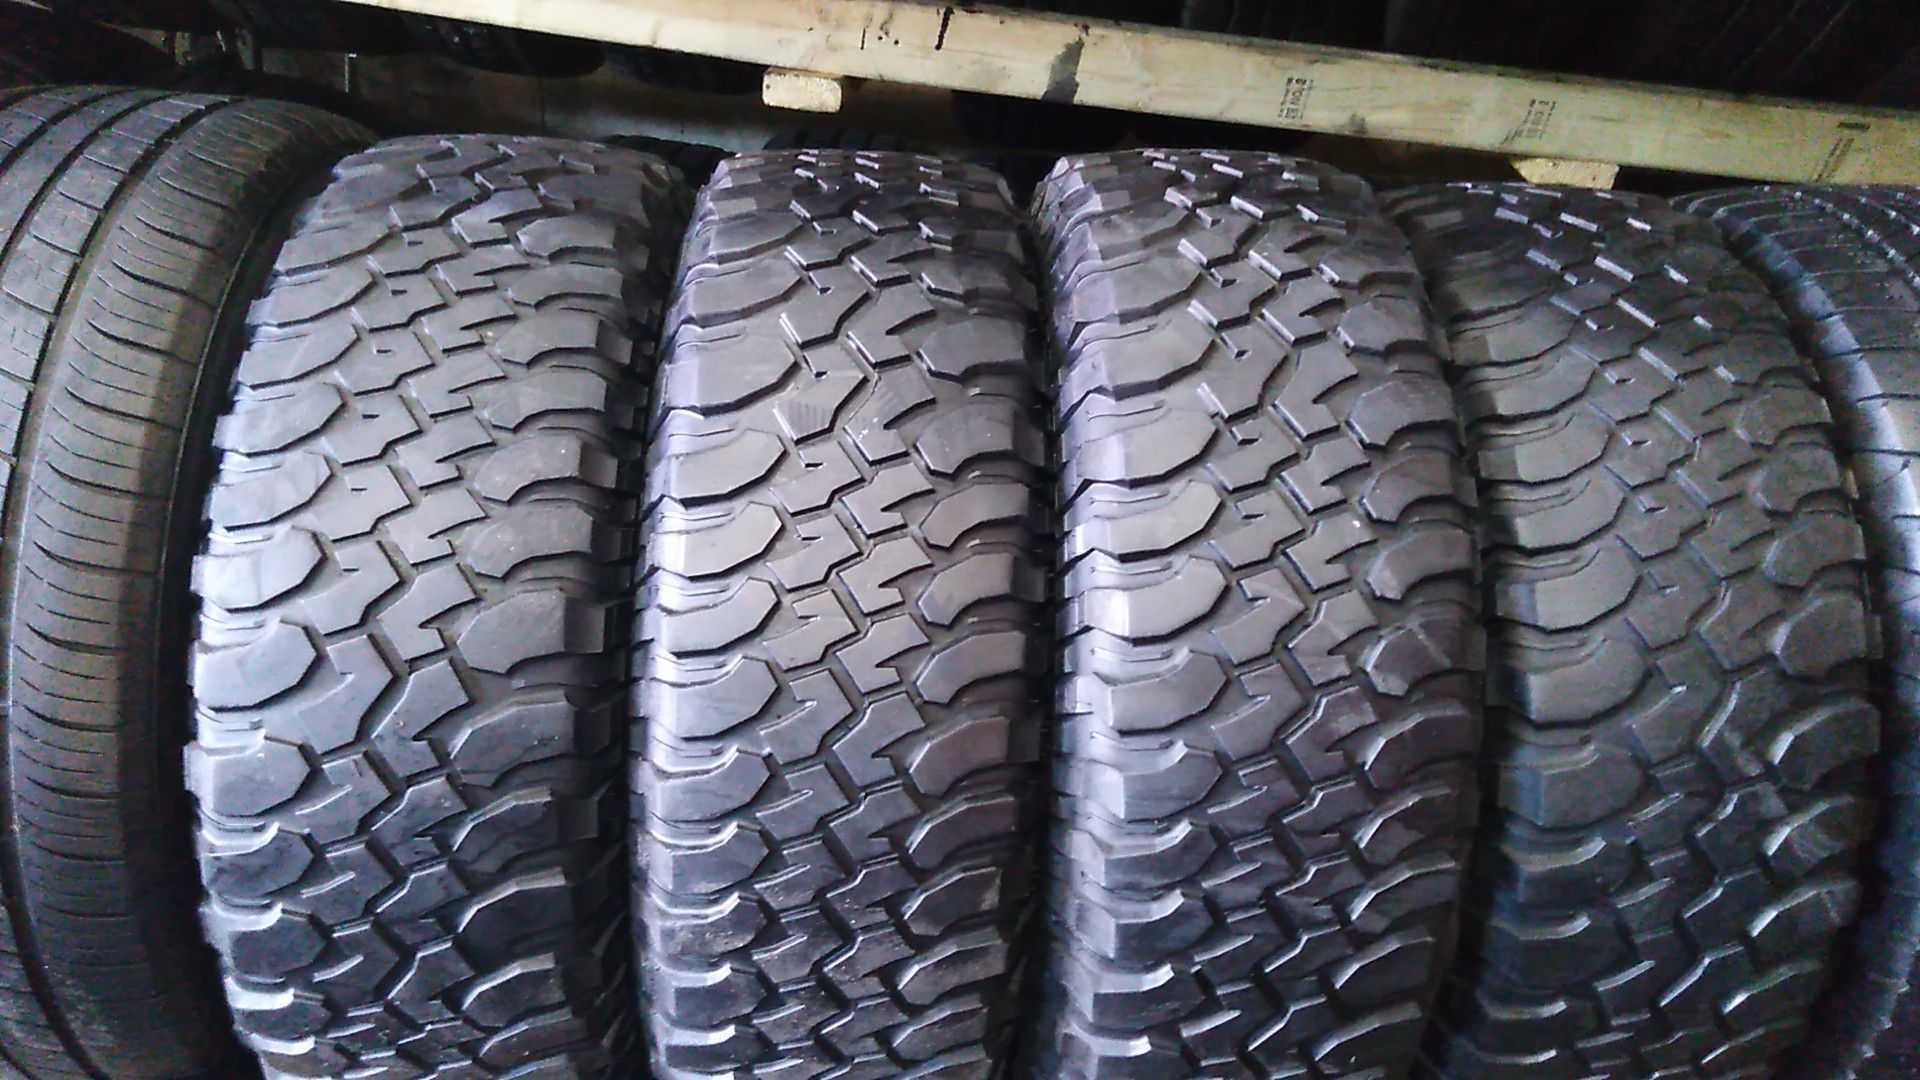 Four BFGOODRICH tires for sale 255/75/17